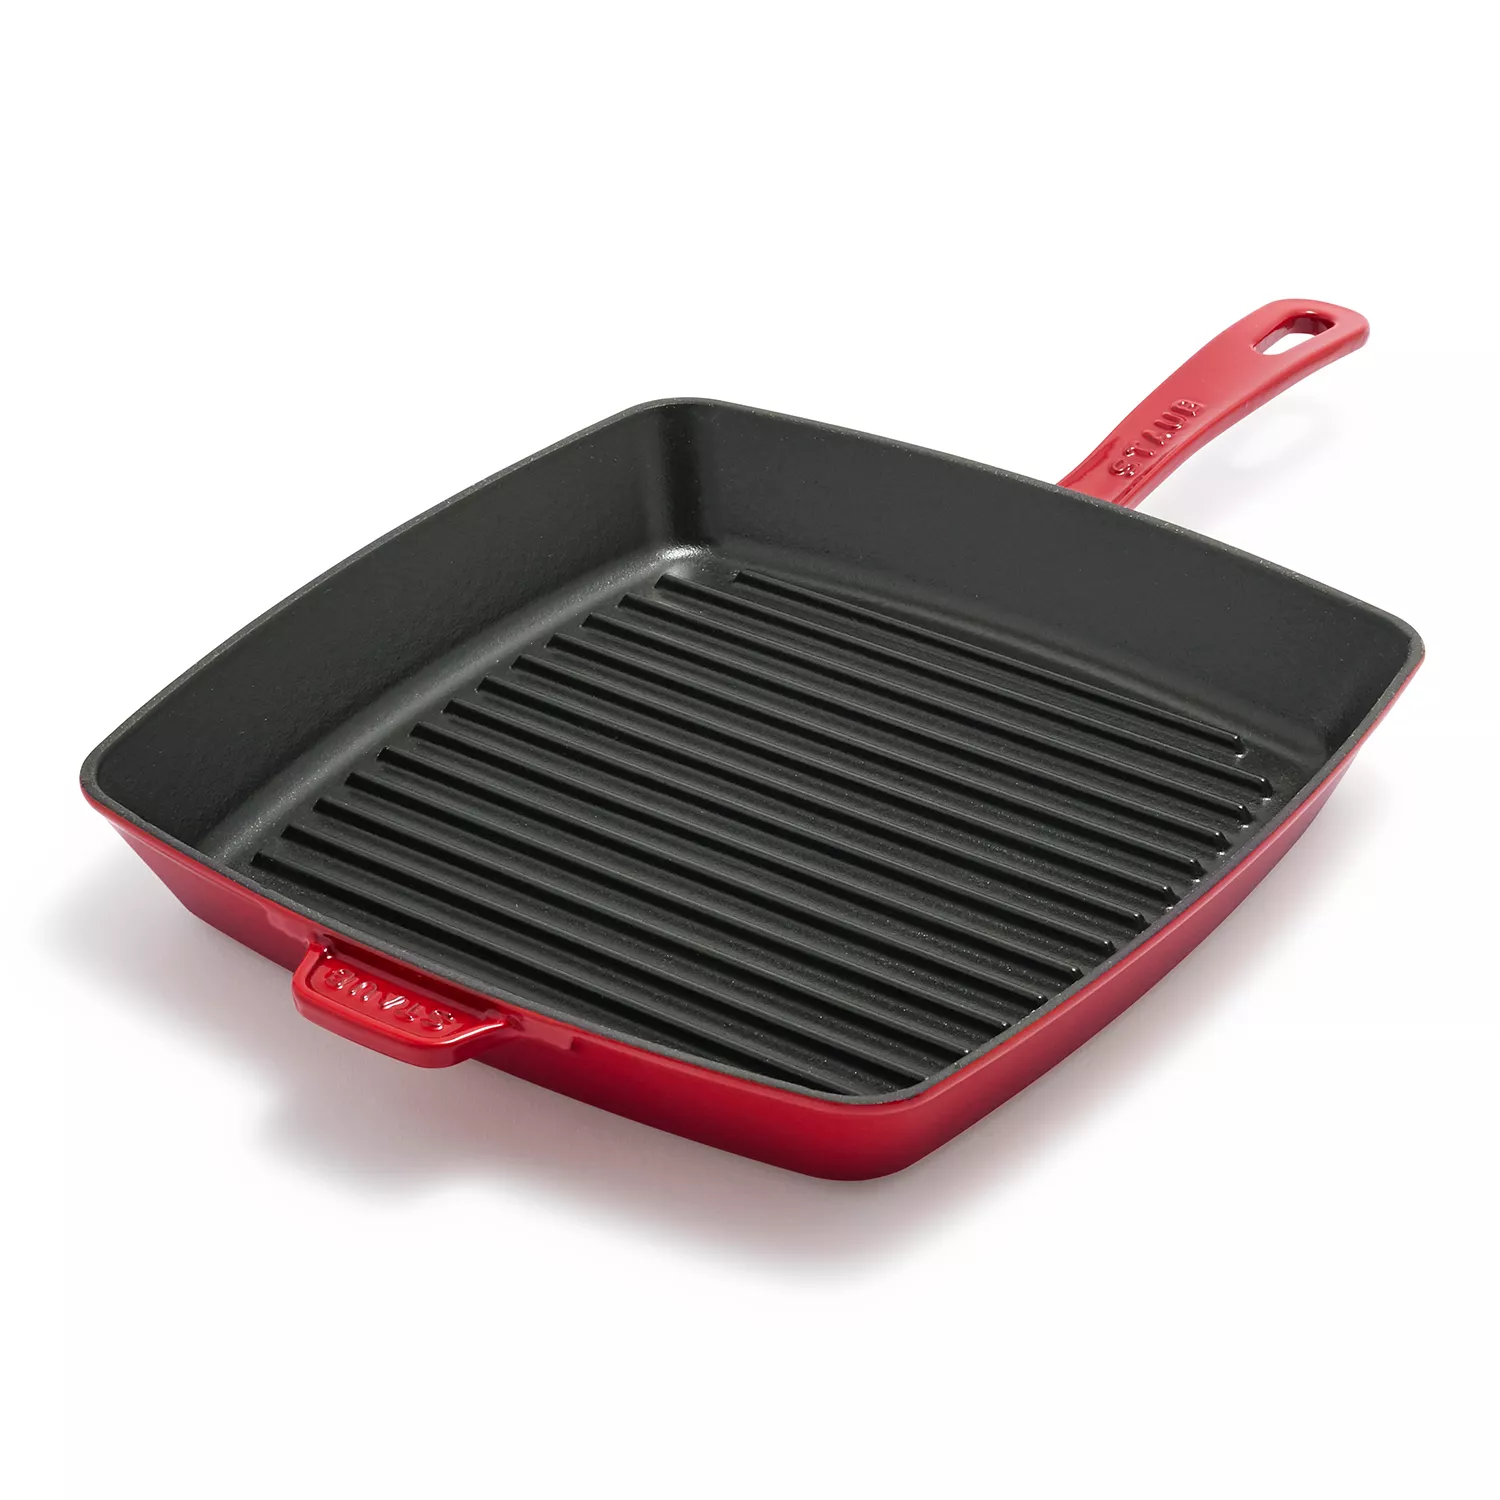 Staub grill pan/skillet 26 cm square, red  Advantageously shopping at